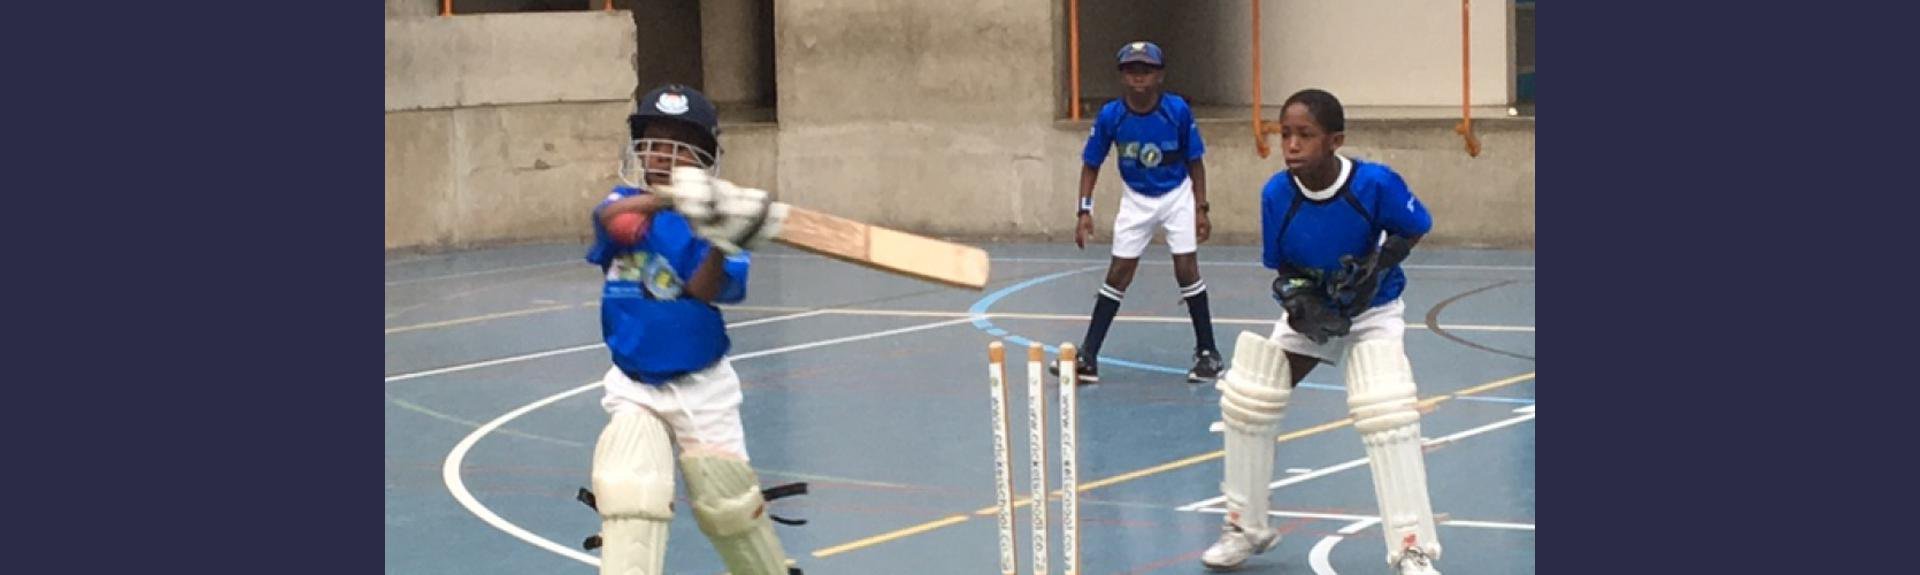 Cricket School of Excellence Winter Indoor Holiday Clinic